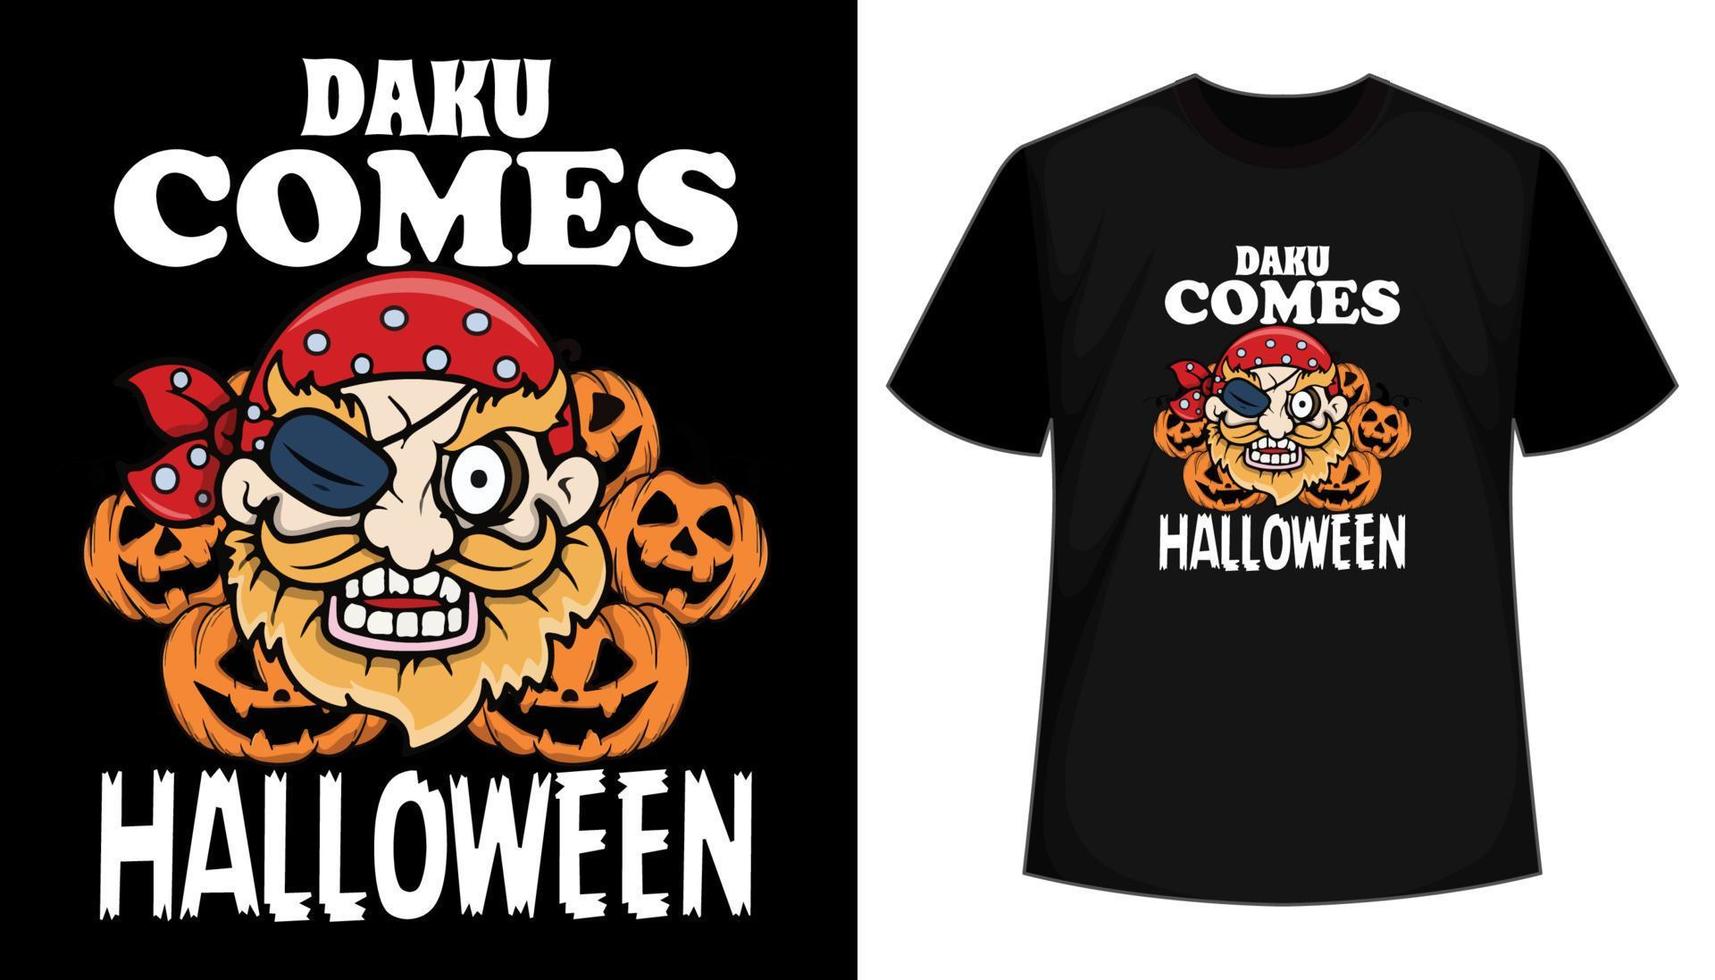 Dark comes Halloween tshirt design with scary zombie and pumpkin vector